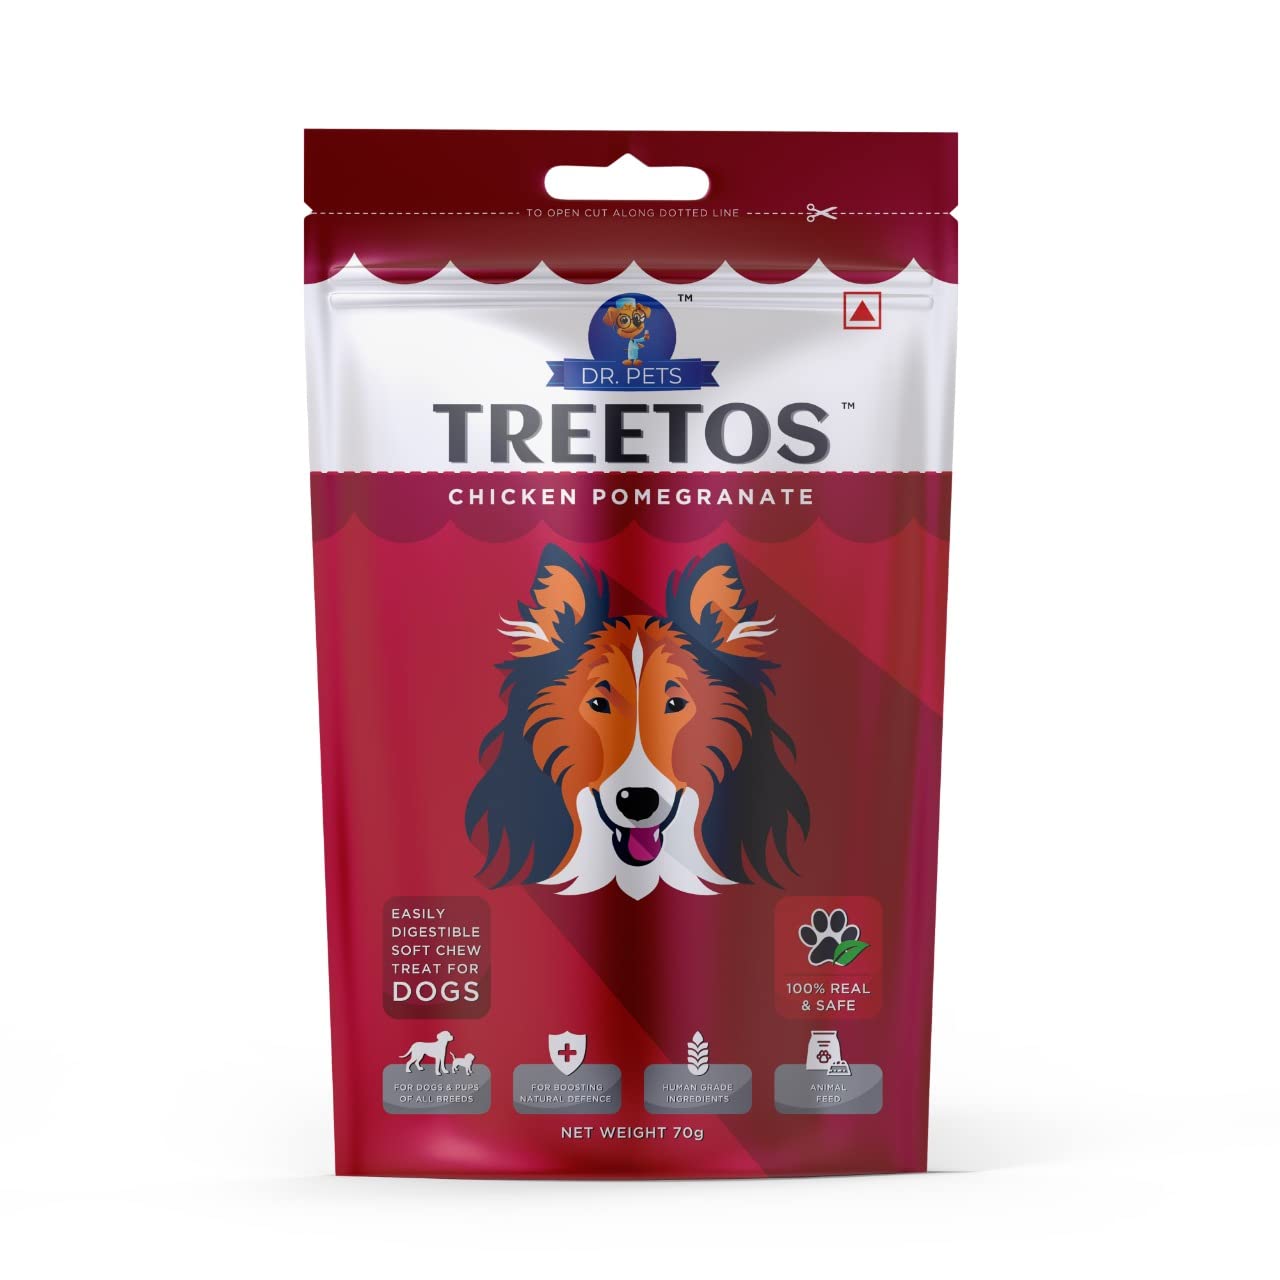 TREETOS Chicken Pomegranate by DR. Pets (70 g Pack)